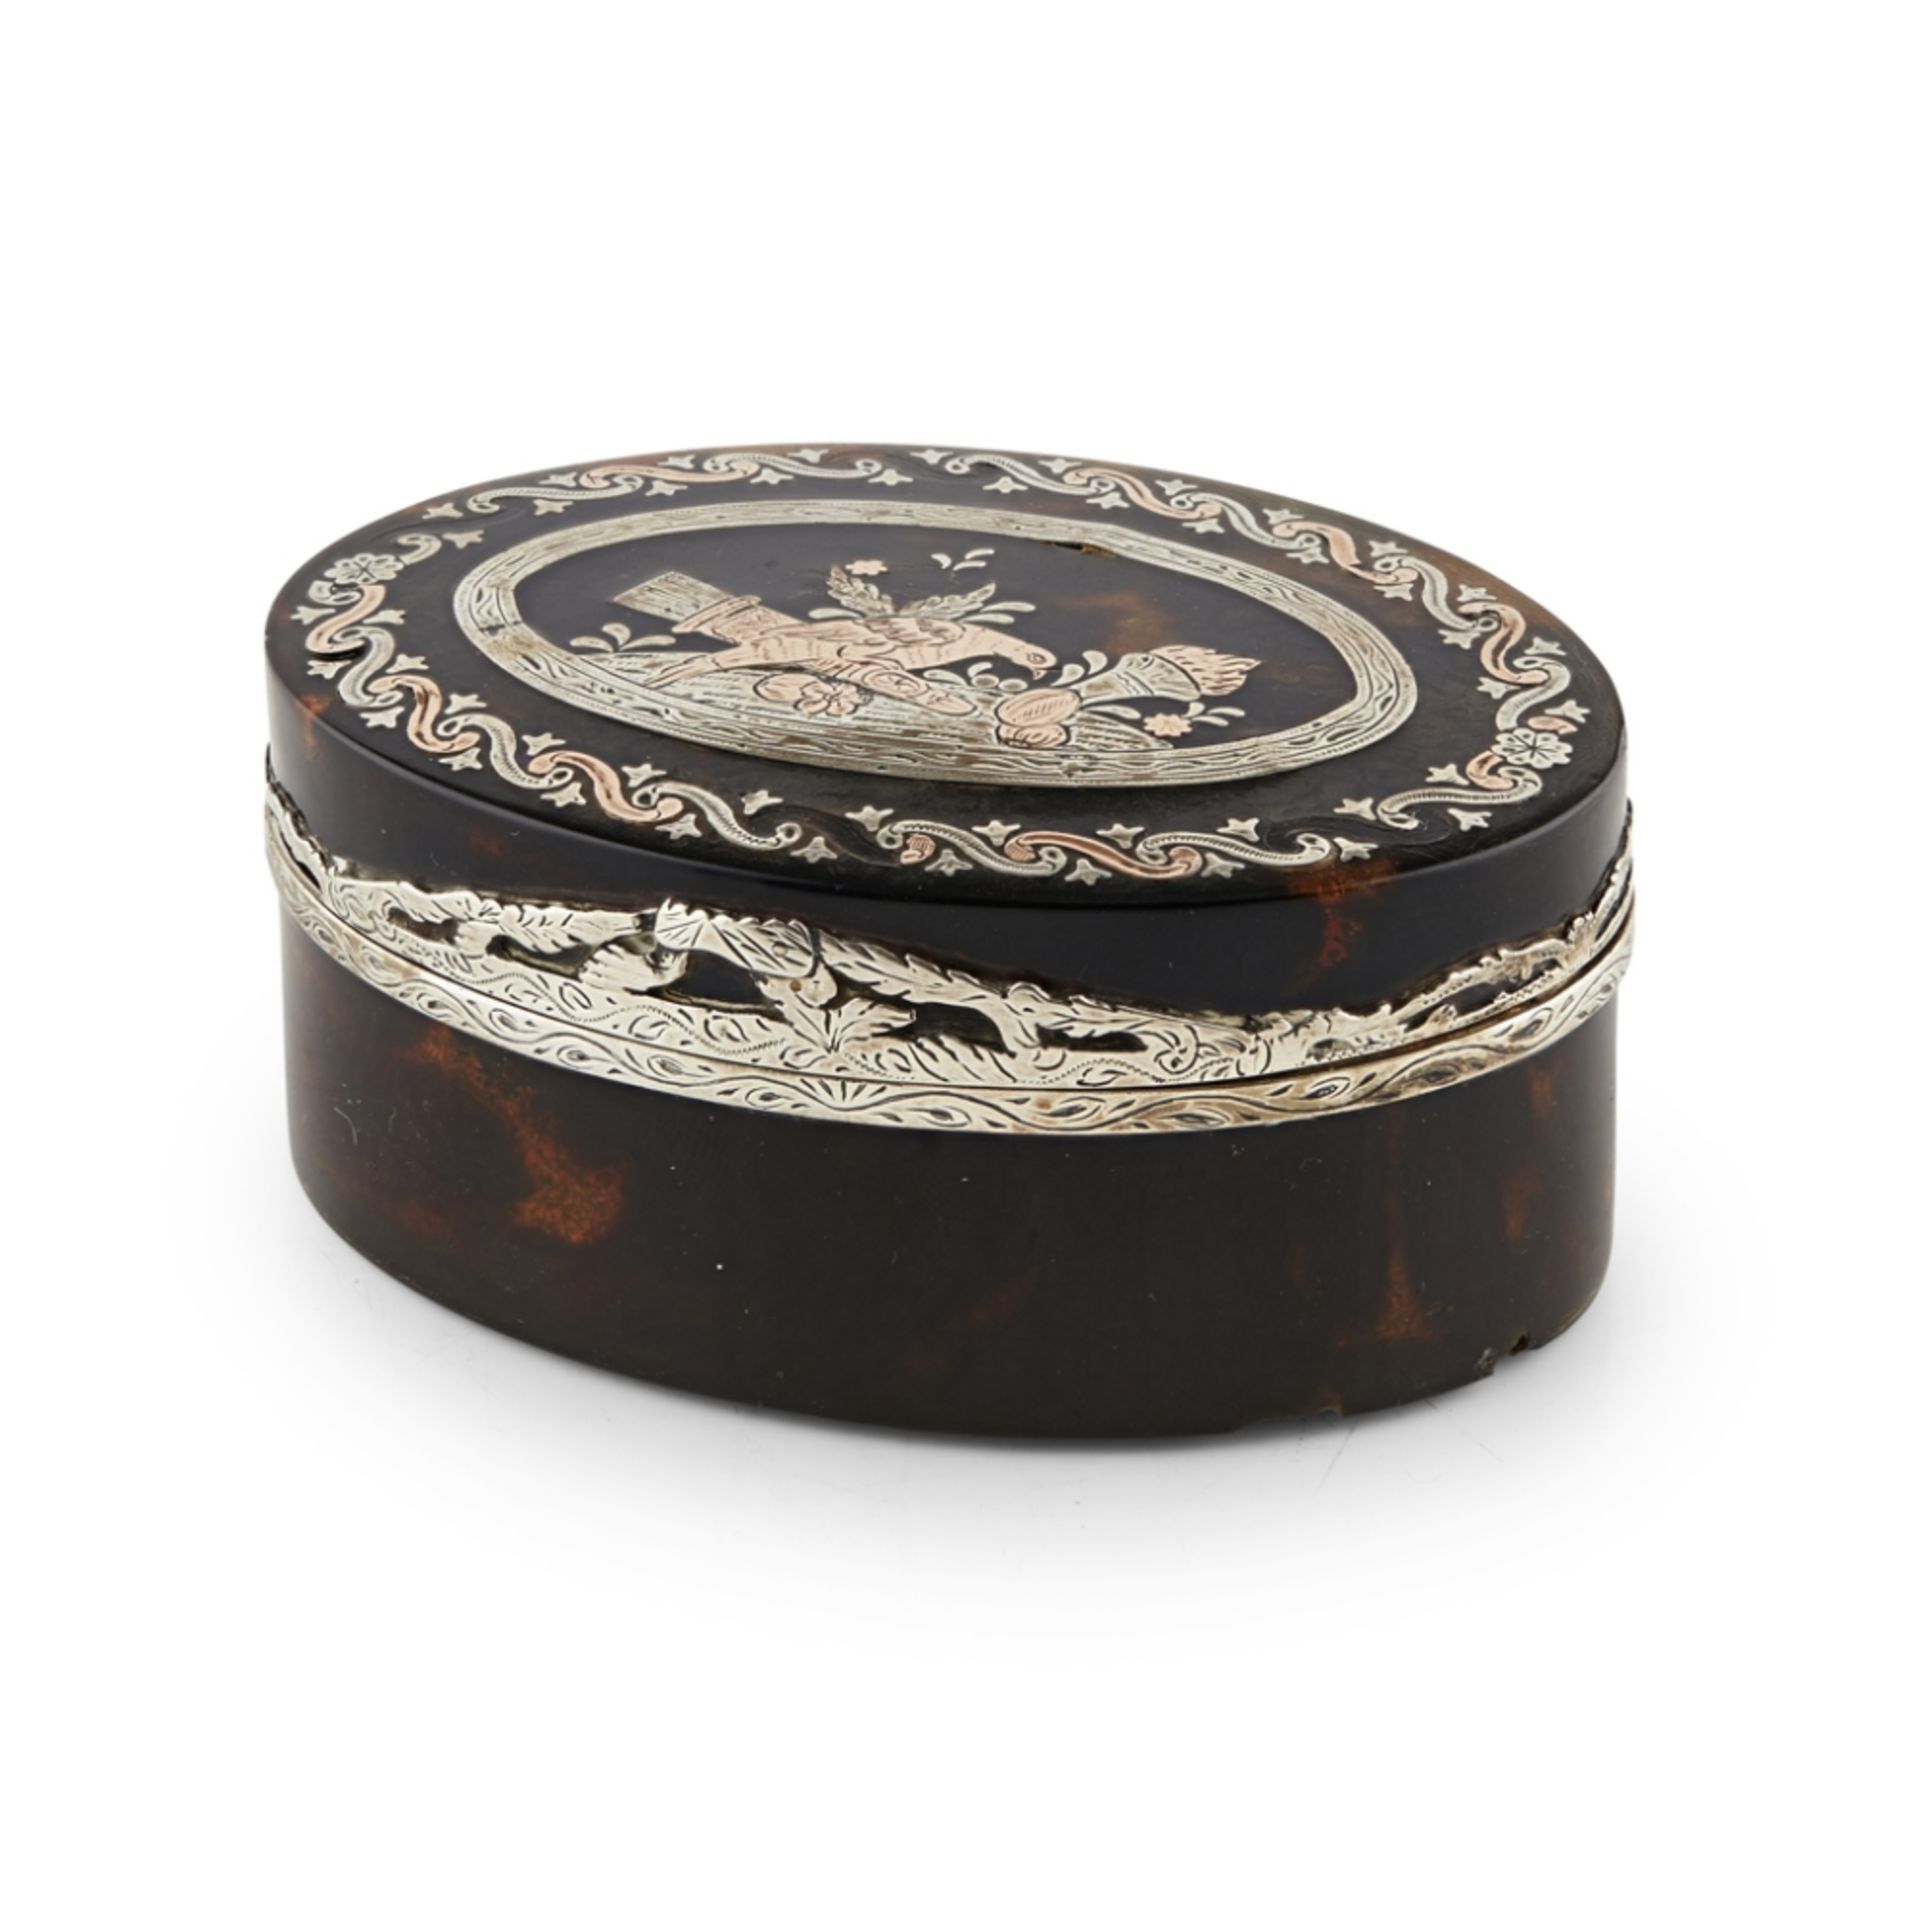 FRENCH TORTOISESHELL AND PIQUE SNUFF BOXLATE 18TH/ EARLY 19TH CENTURY of oval form, the hinged lid